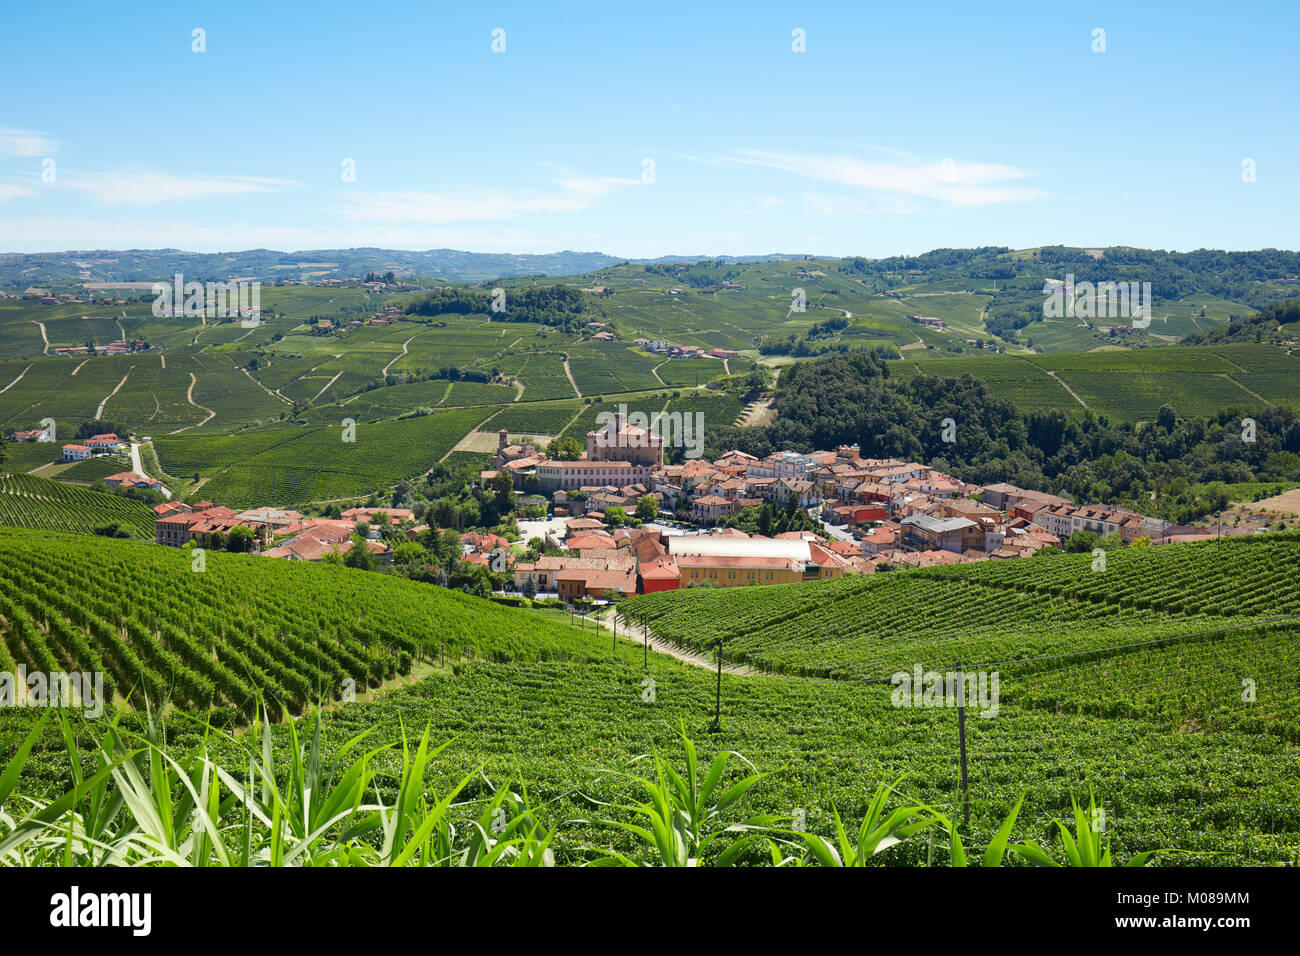 Barolo medieval town surrounded by vineyards, Langhe hills in Italy Stock Photo